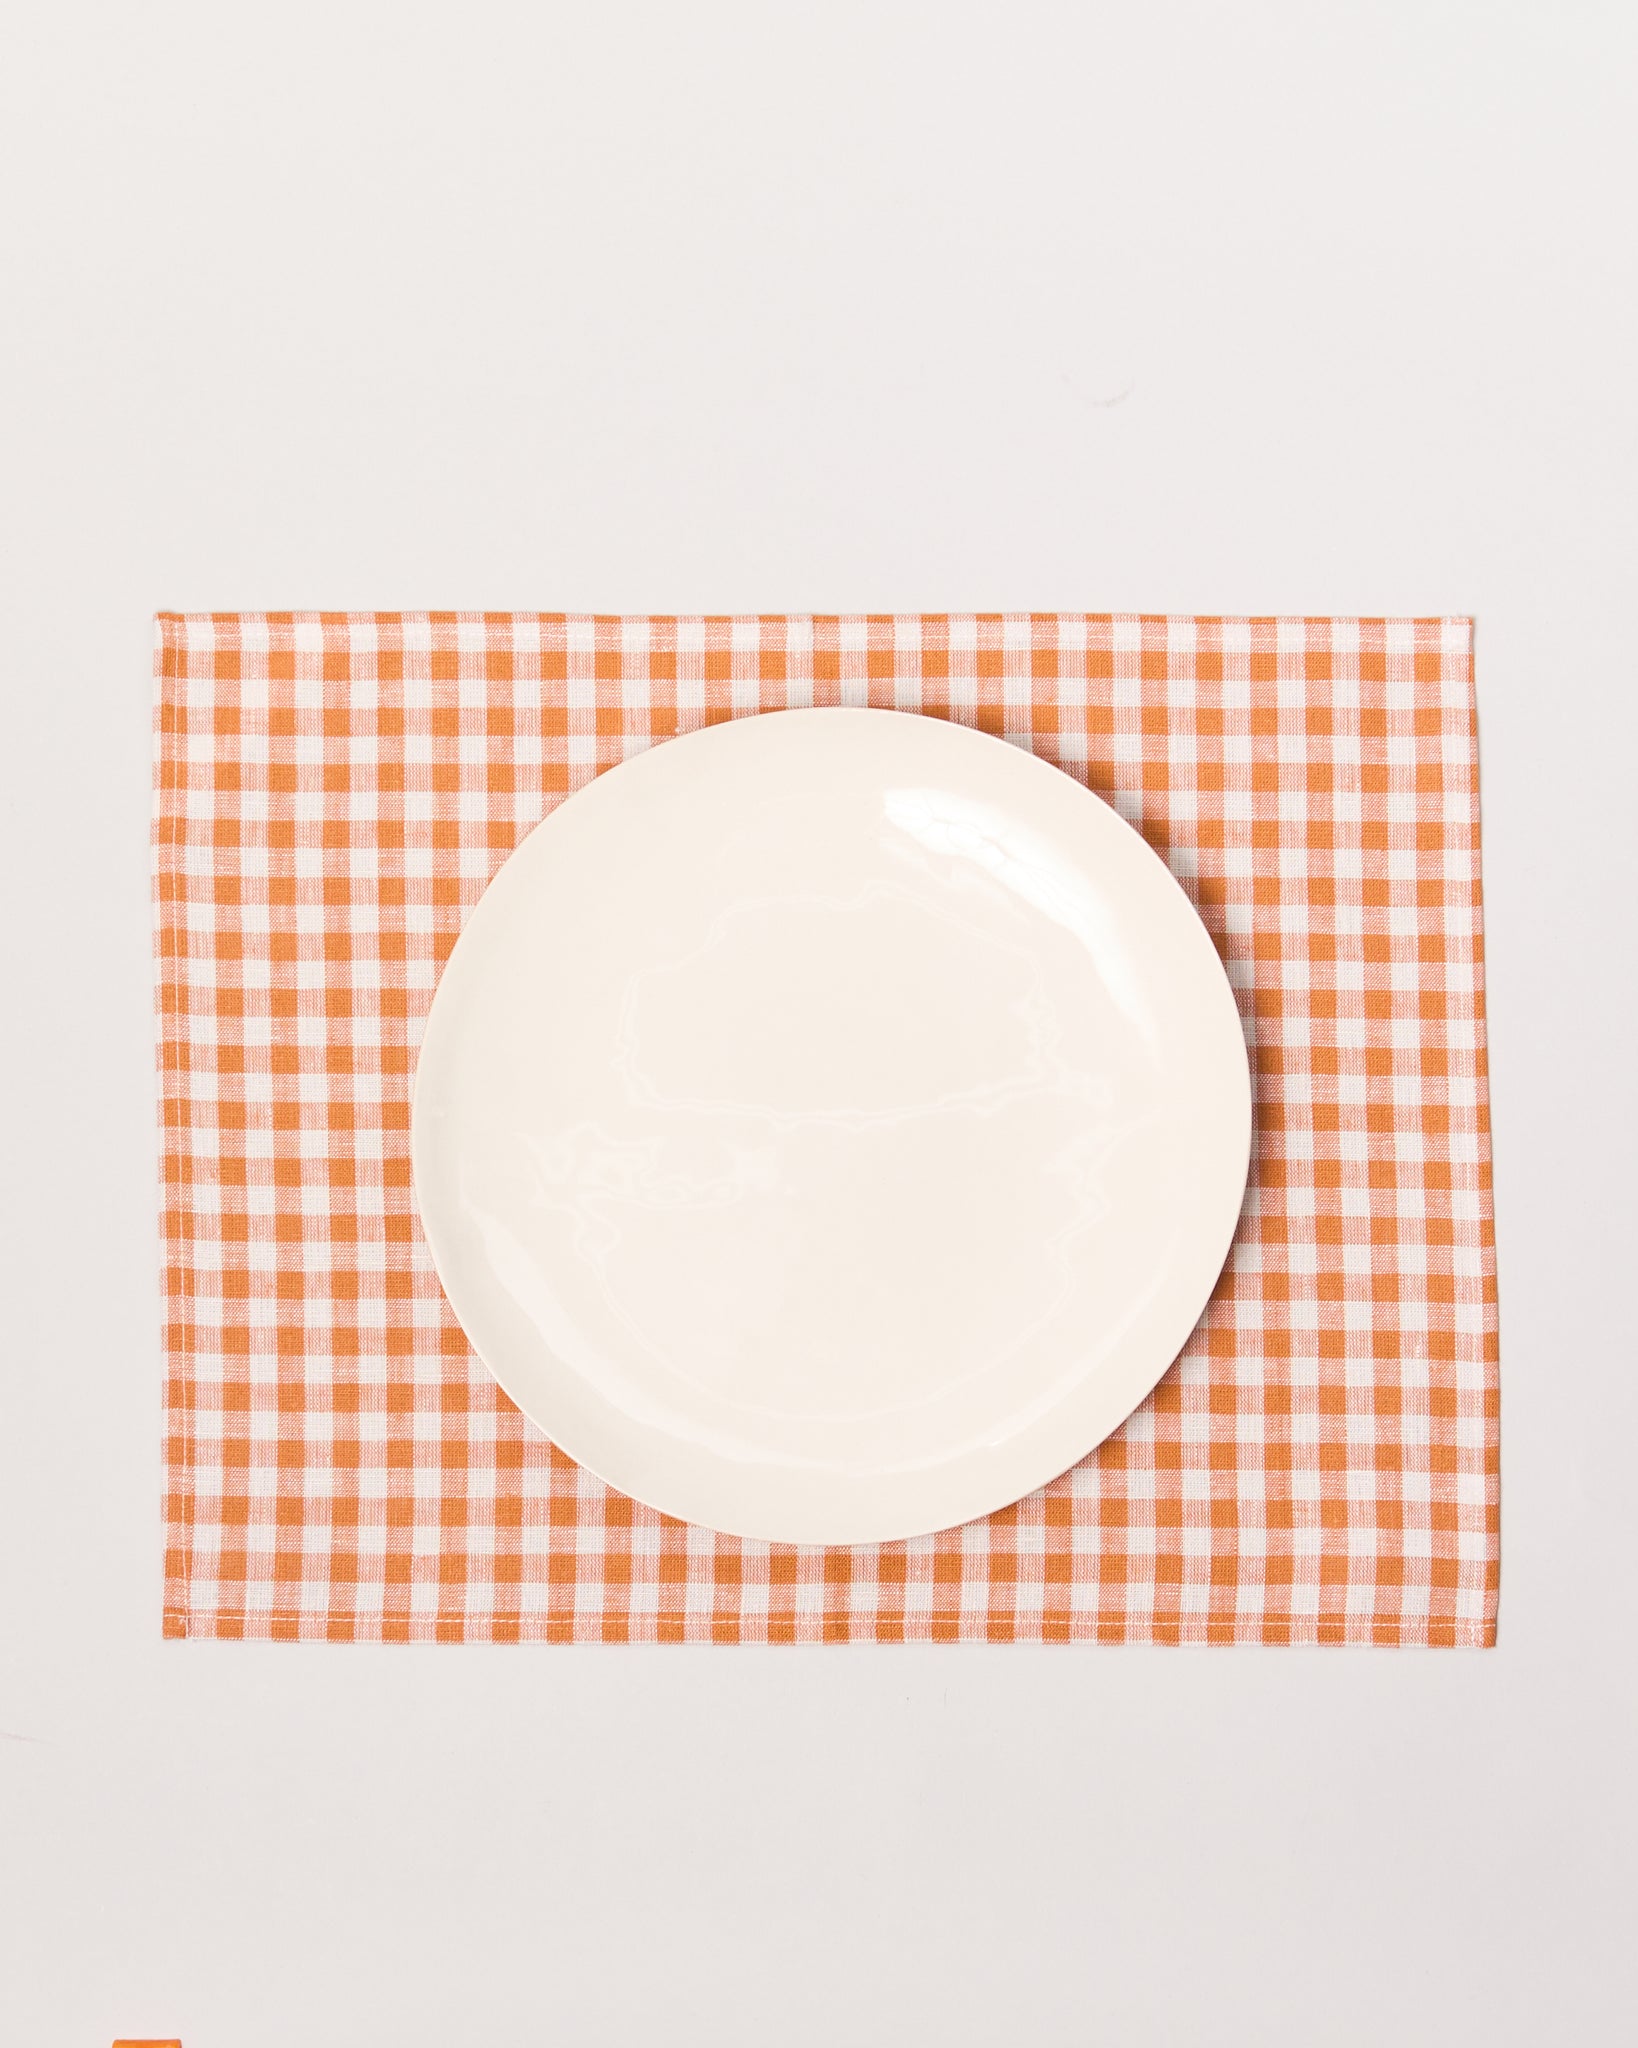 Linen Placemats in Ochre Check, Set of 4